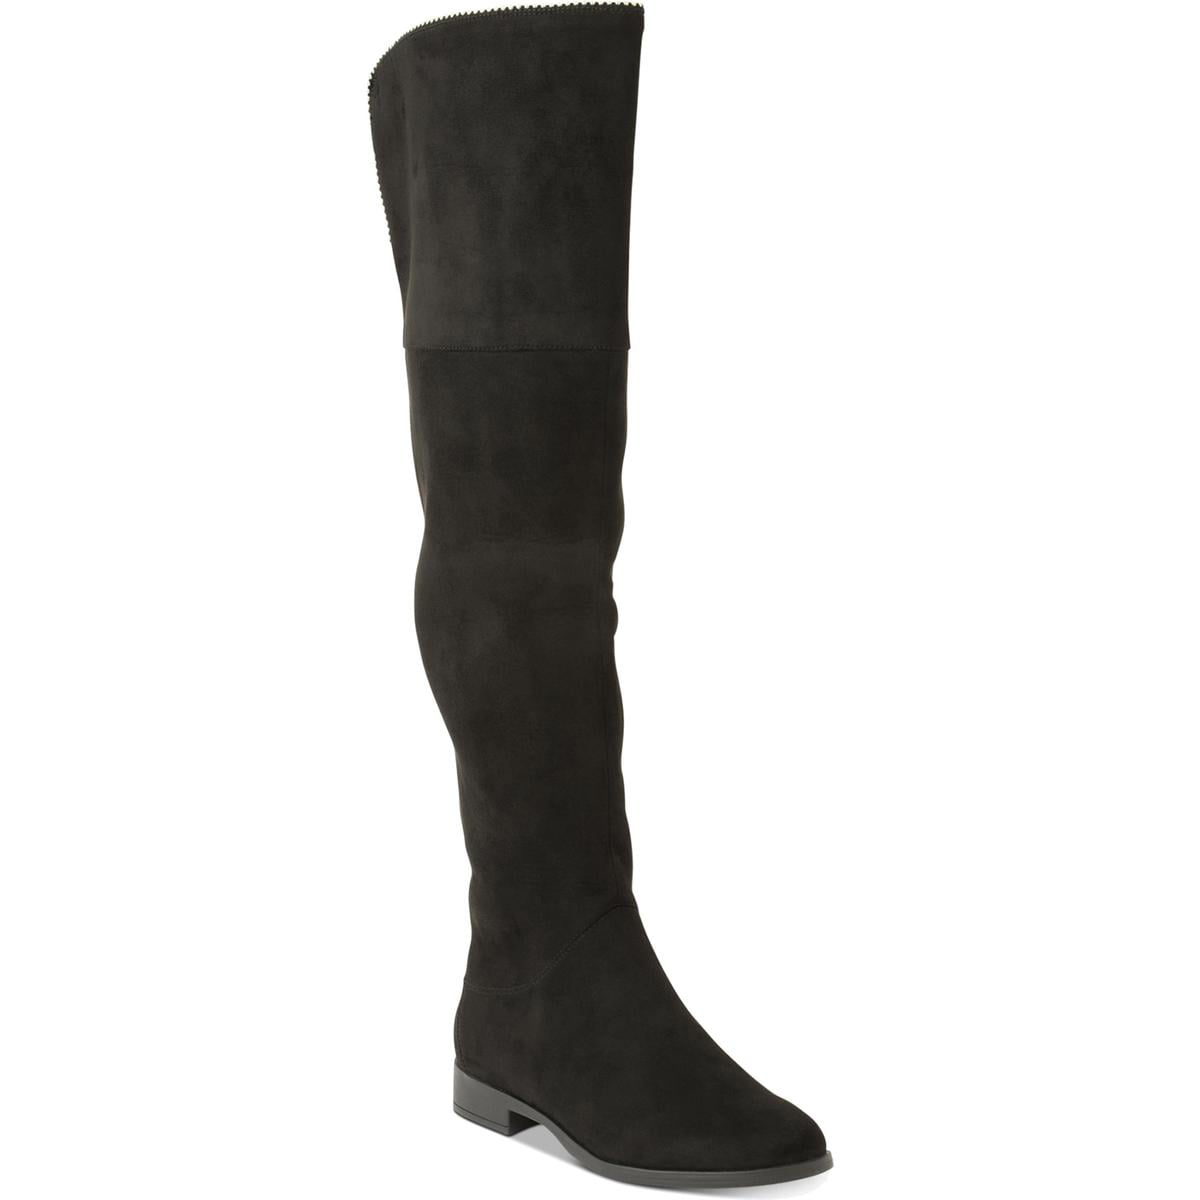 Details about   XOXO Womens Tristen Suede Embellished Tall Over-The-Knee Boots Shoes BHFO 0228 